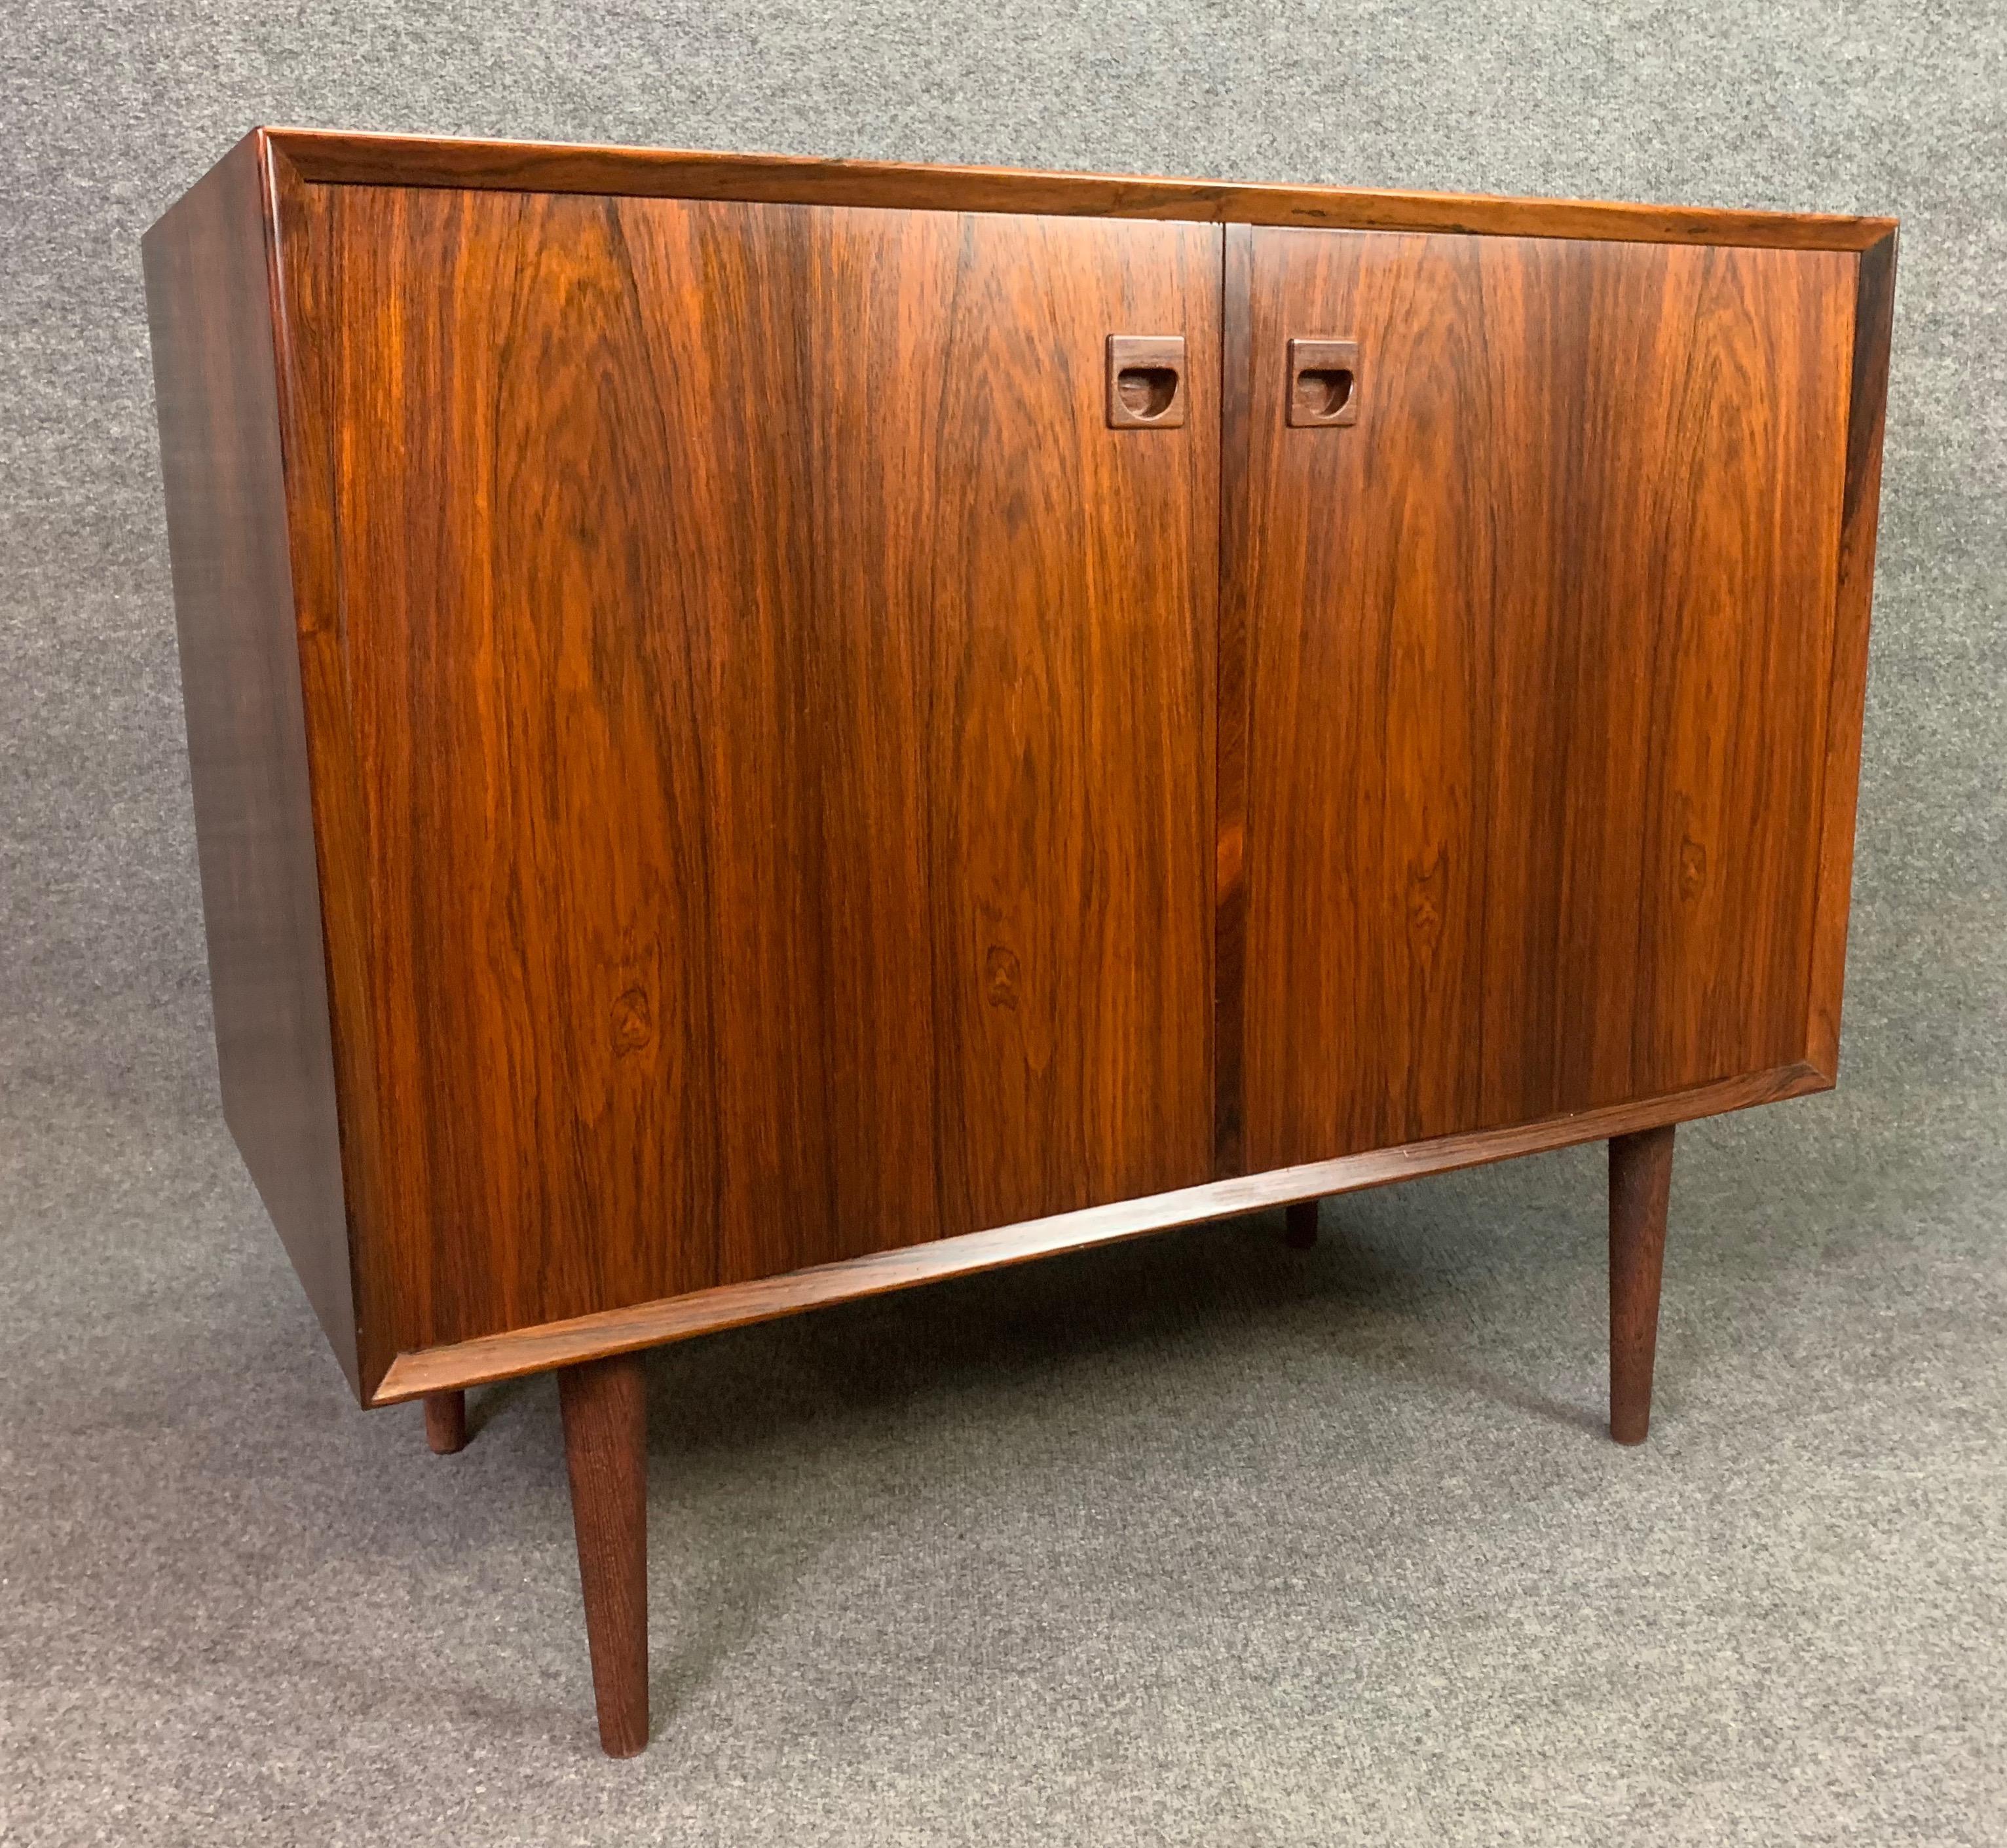 Here is a beautiful Scandinavian Modern case piece manufactured by Brouer Møbelfabrik in Denmark in the 1960s.
This lovely cabinet features a vibrant wood grain, sculpted recessed pulls, tapered legs and two large doors revealing a cupboard with an